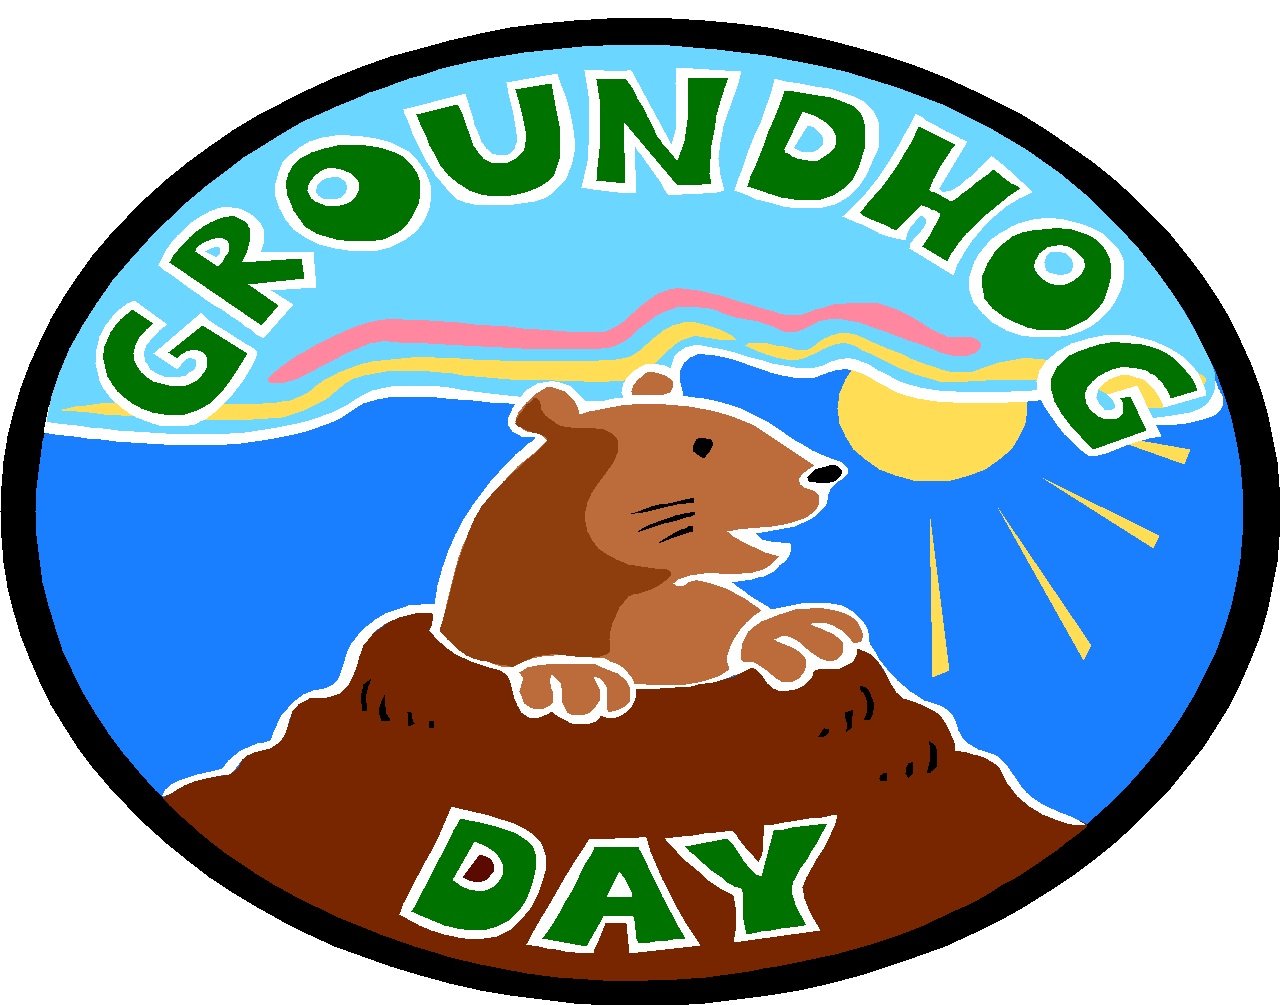  day 2013   Ground Hog Day   Photo Picture Image and Wallpaper